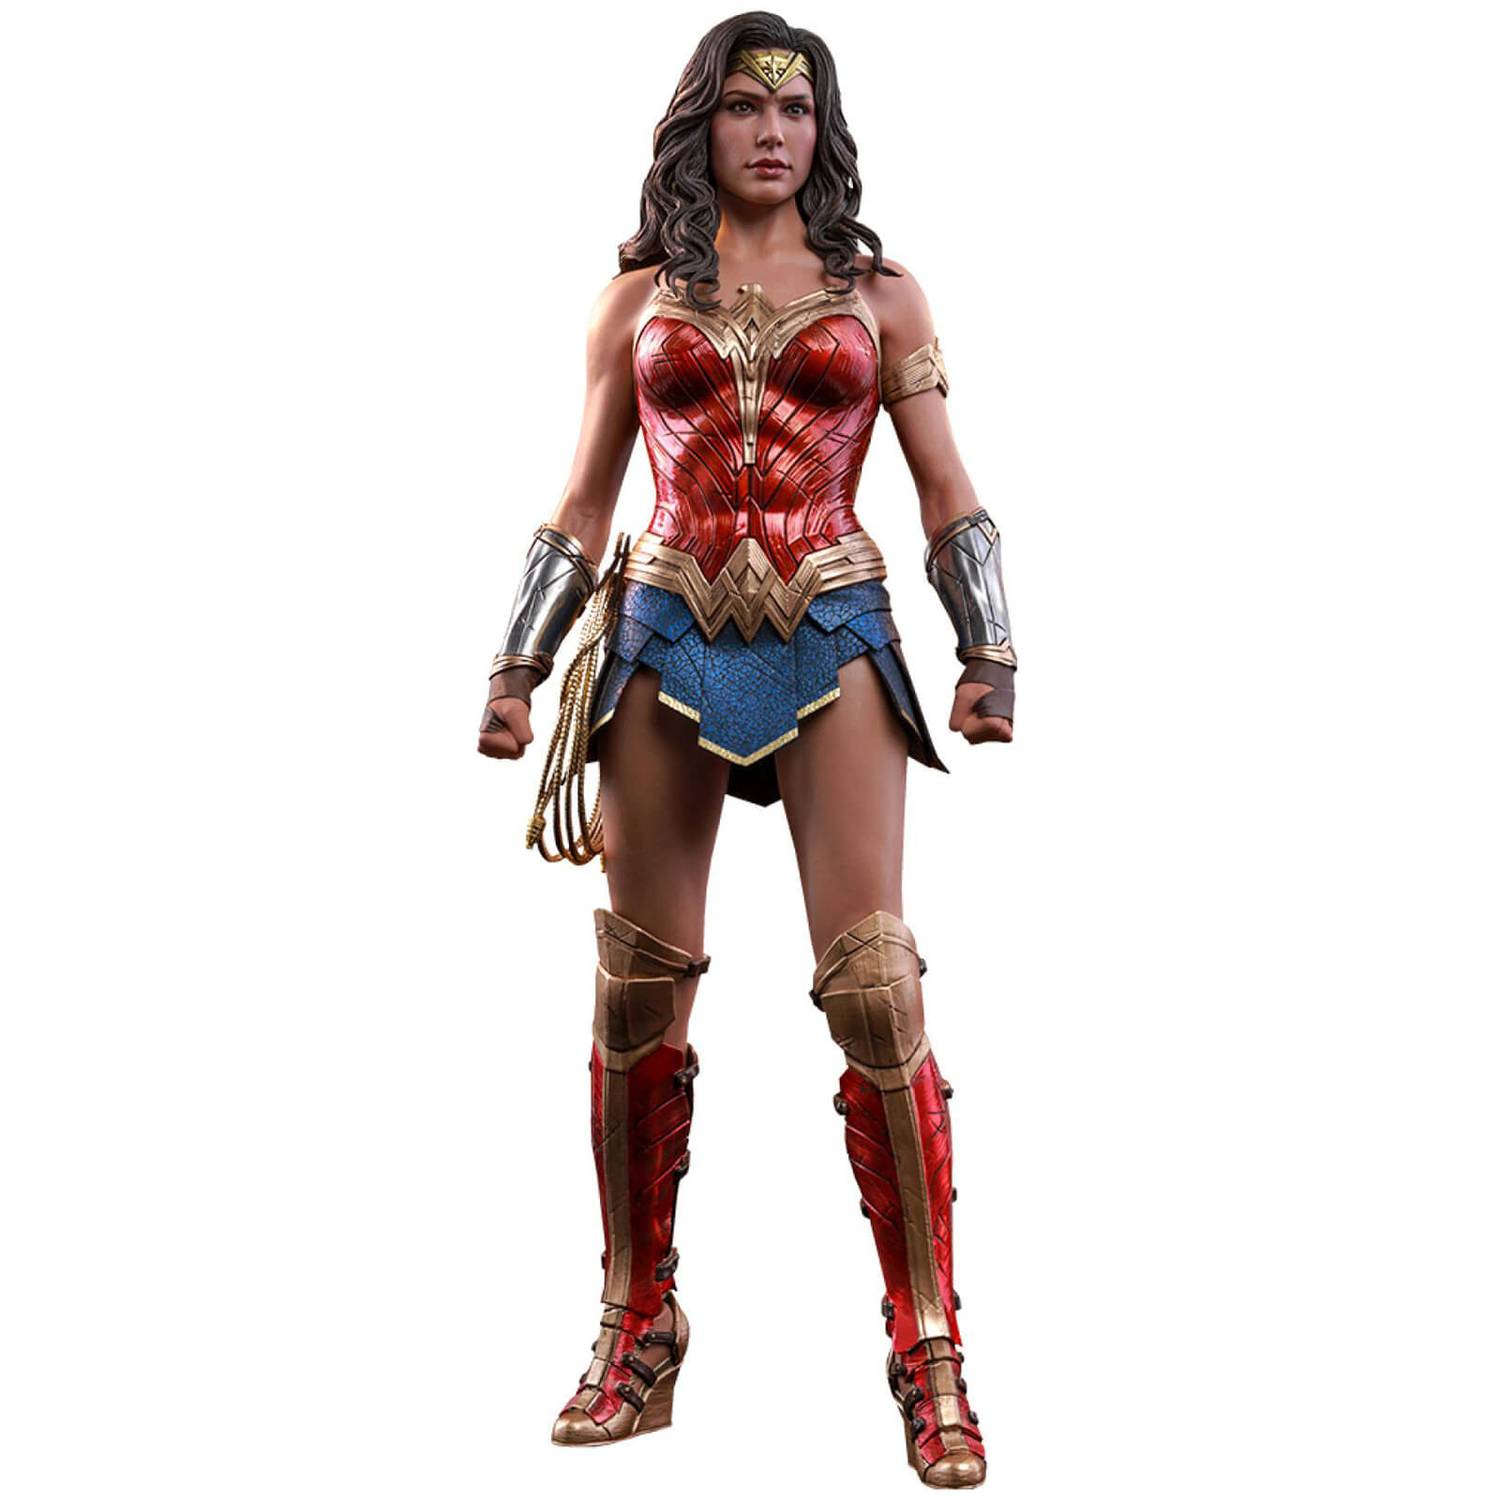 WONDER WOMAN (SPECIAL EDITION) Sixth Scale Figure by Hot Toys